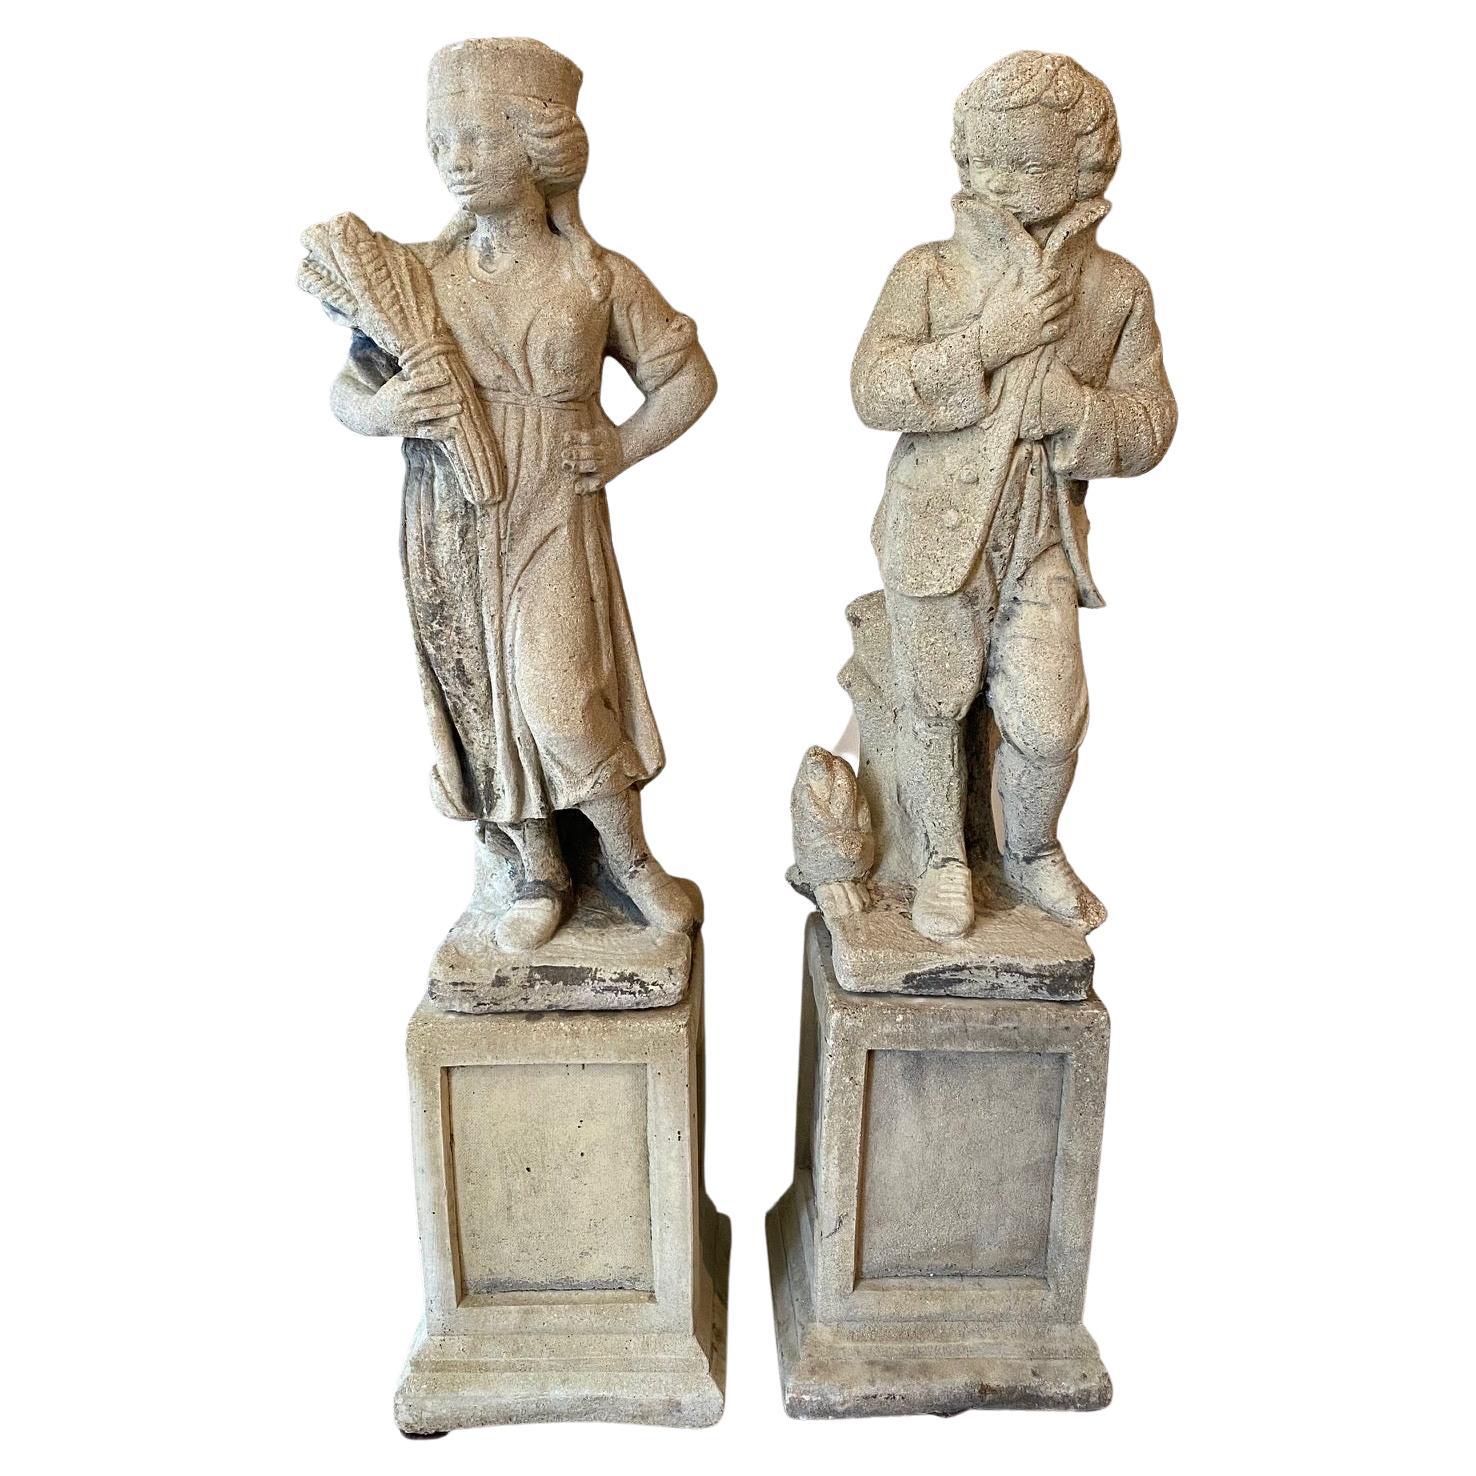  Pair of Cast Stone Figural Garden Statues